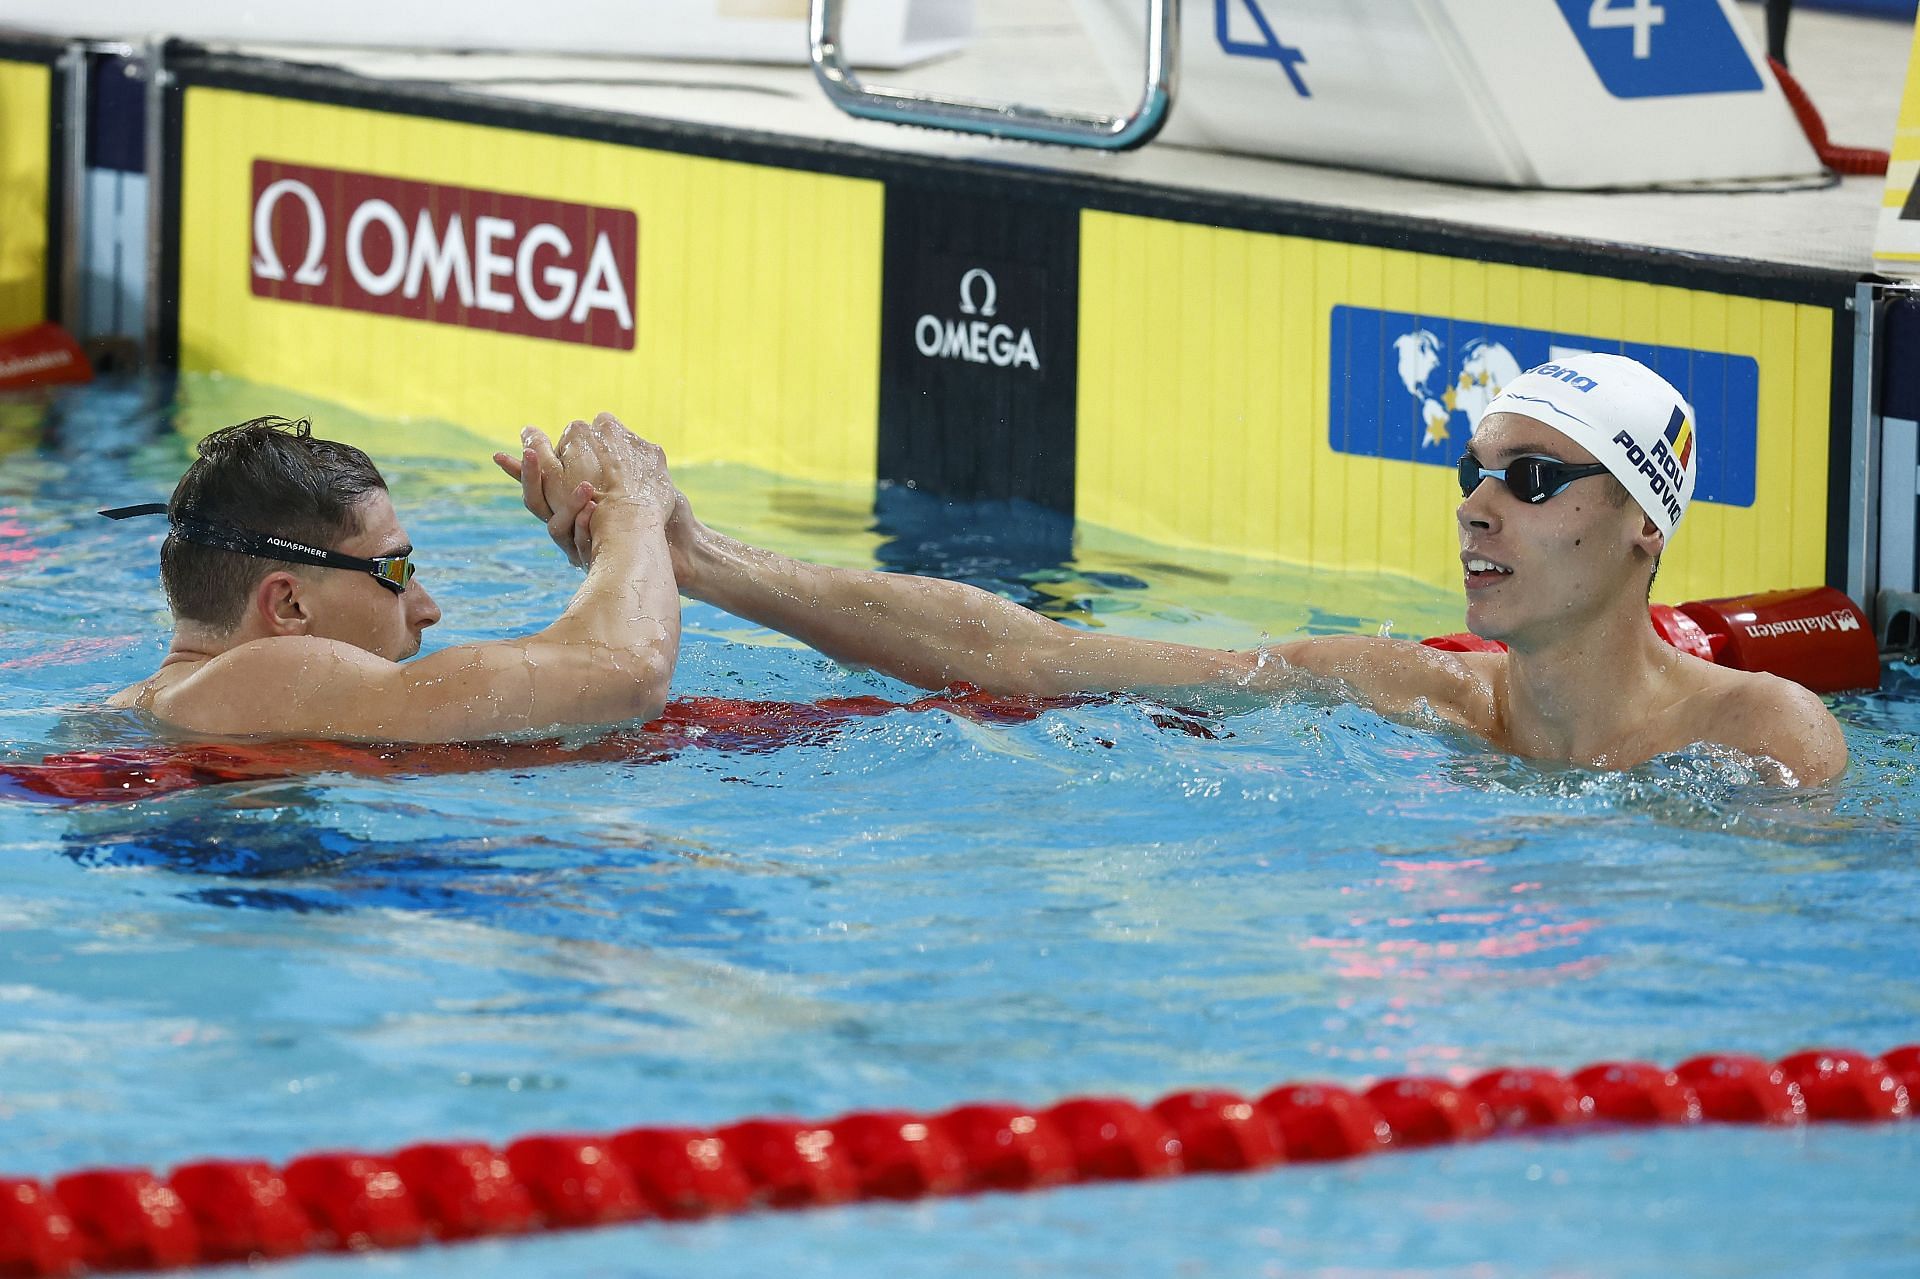 Melbourne 2022 FINA World Short Course Swimming Championships - Day 2